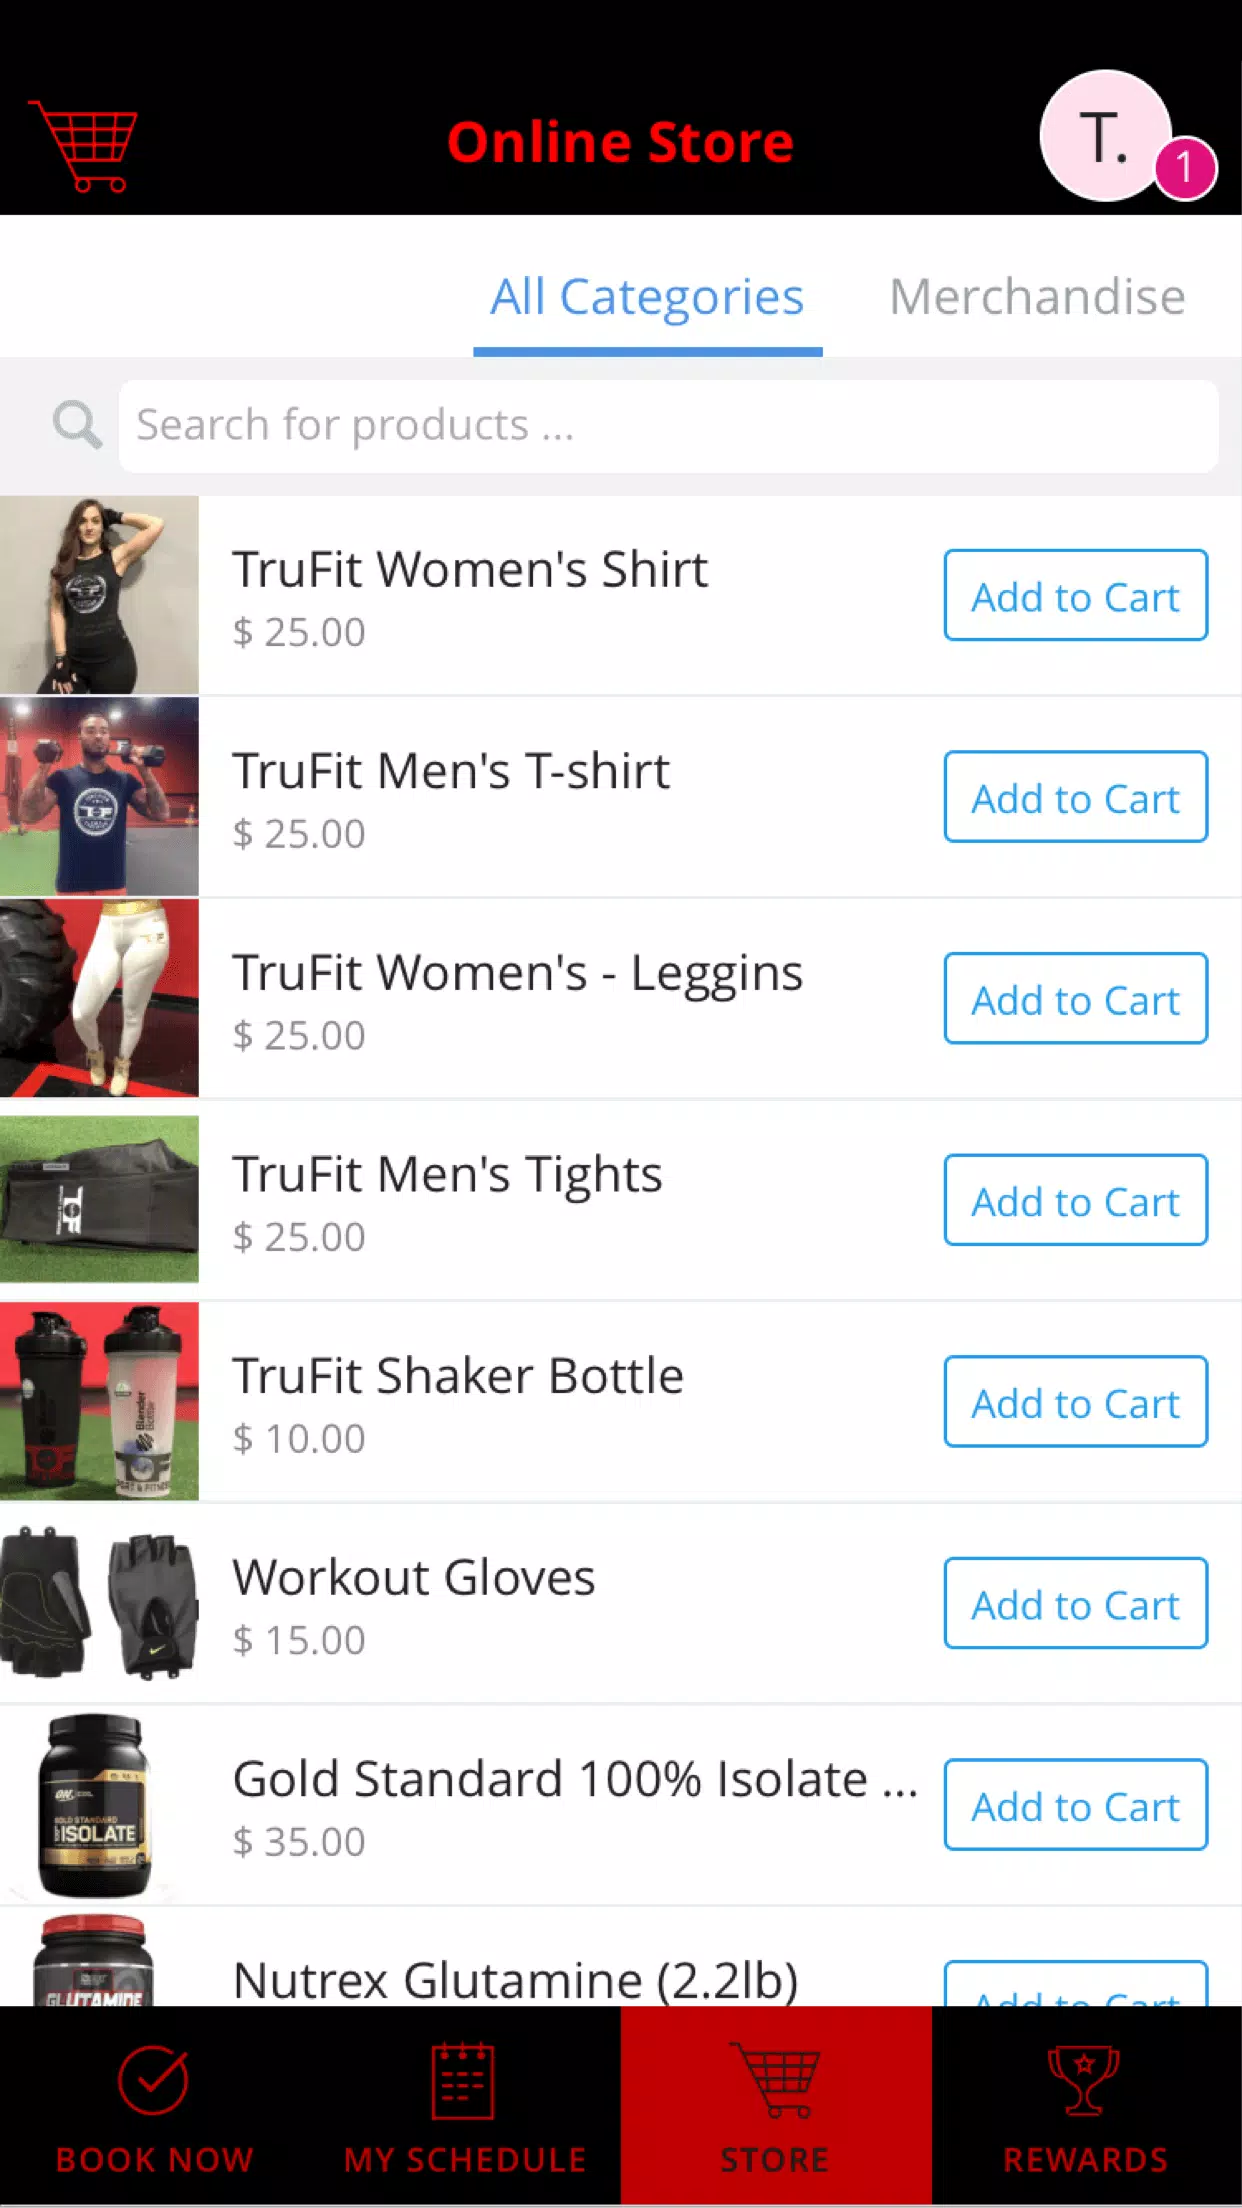 Trufit APK for Android Download